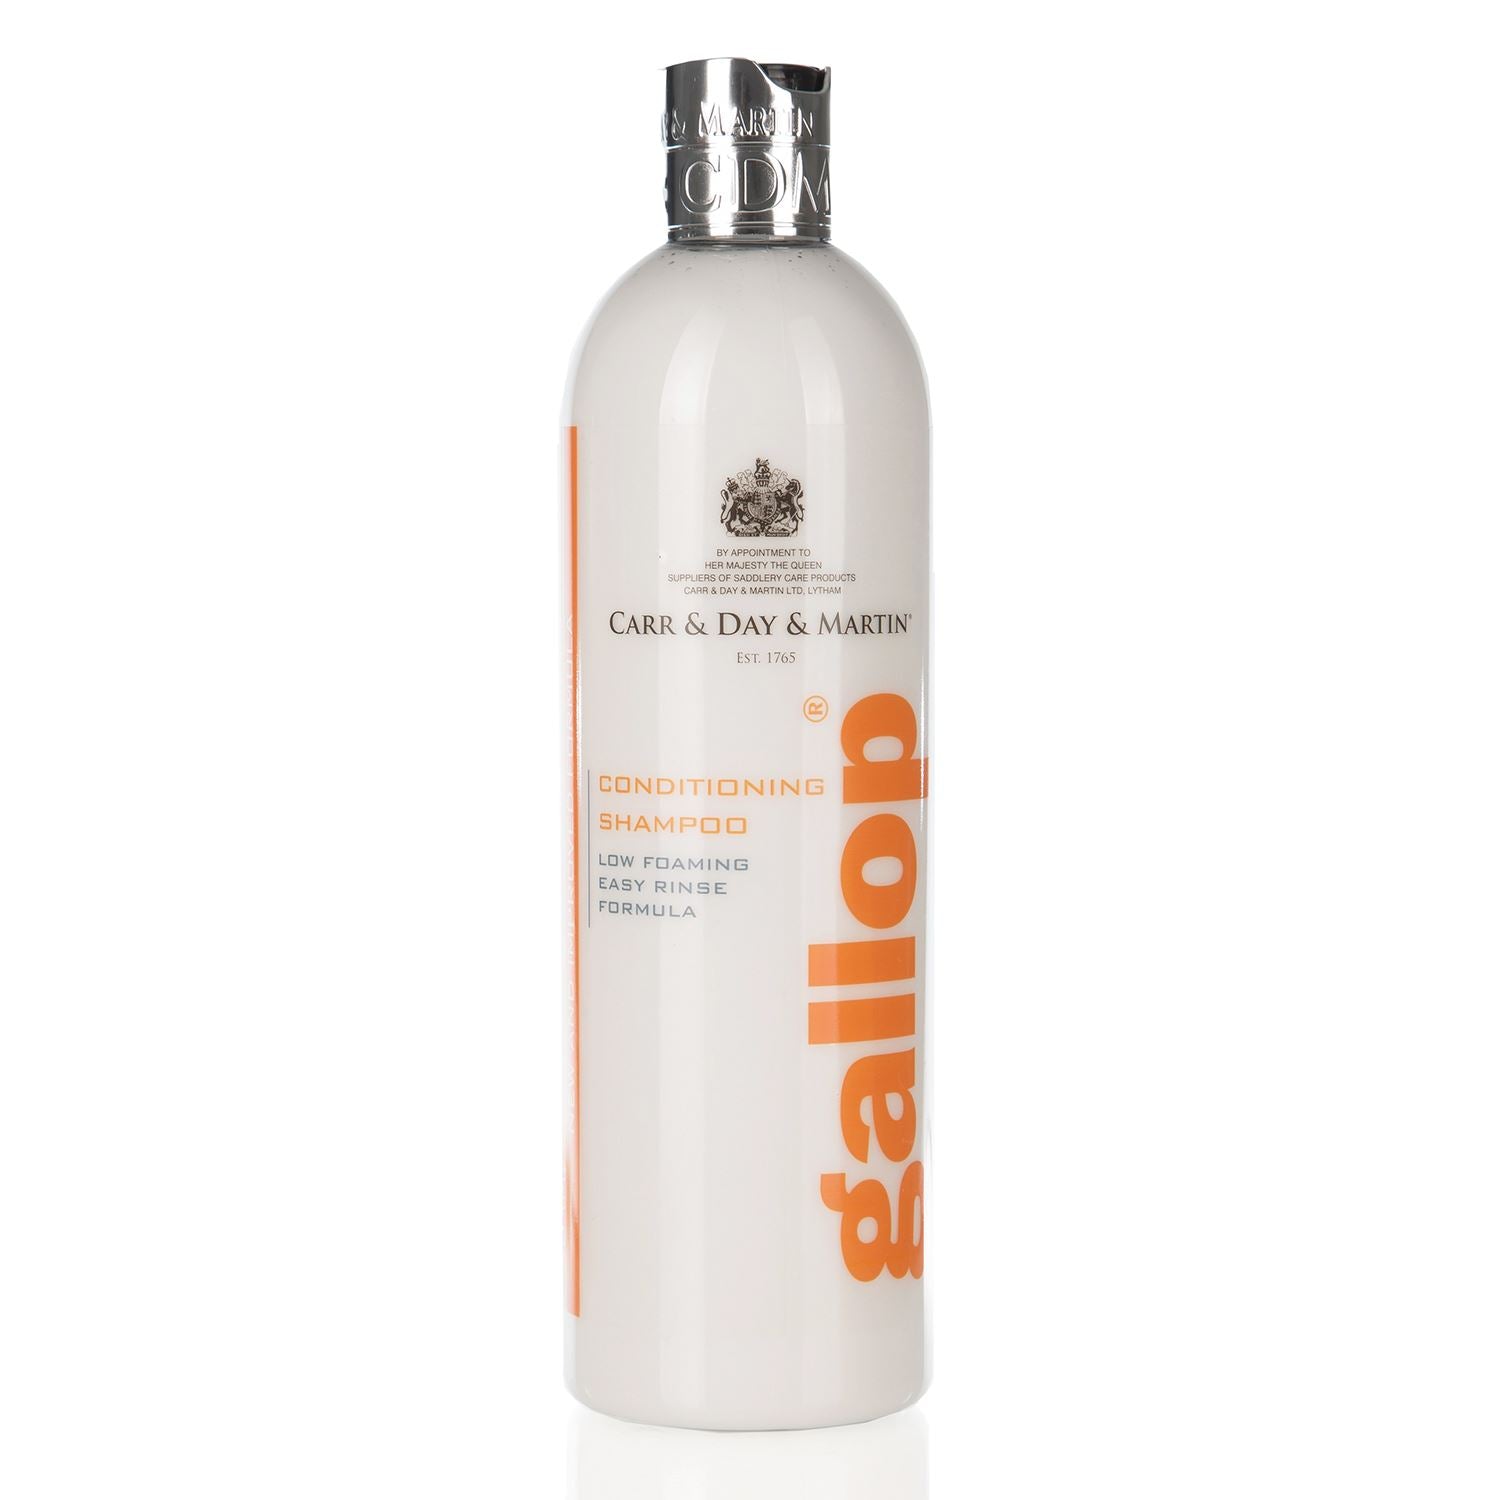 Carr & Day & Martin Gallop Conditioning Shampoo - Just Horse Riders